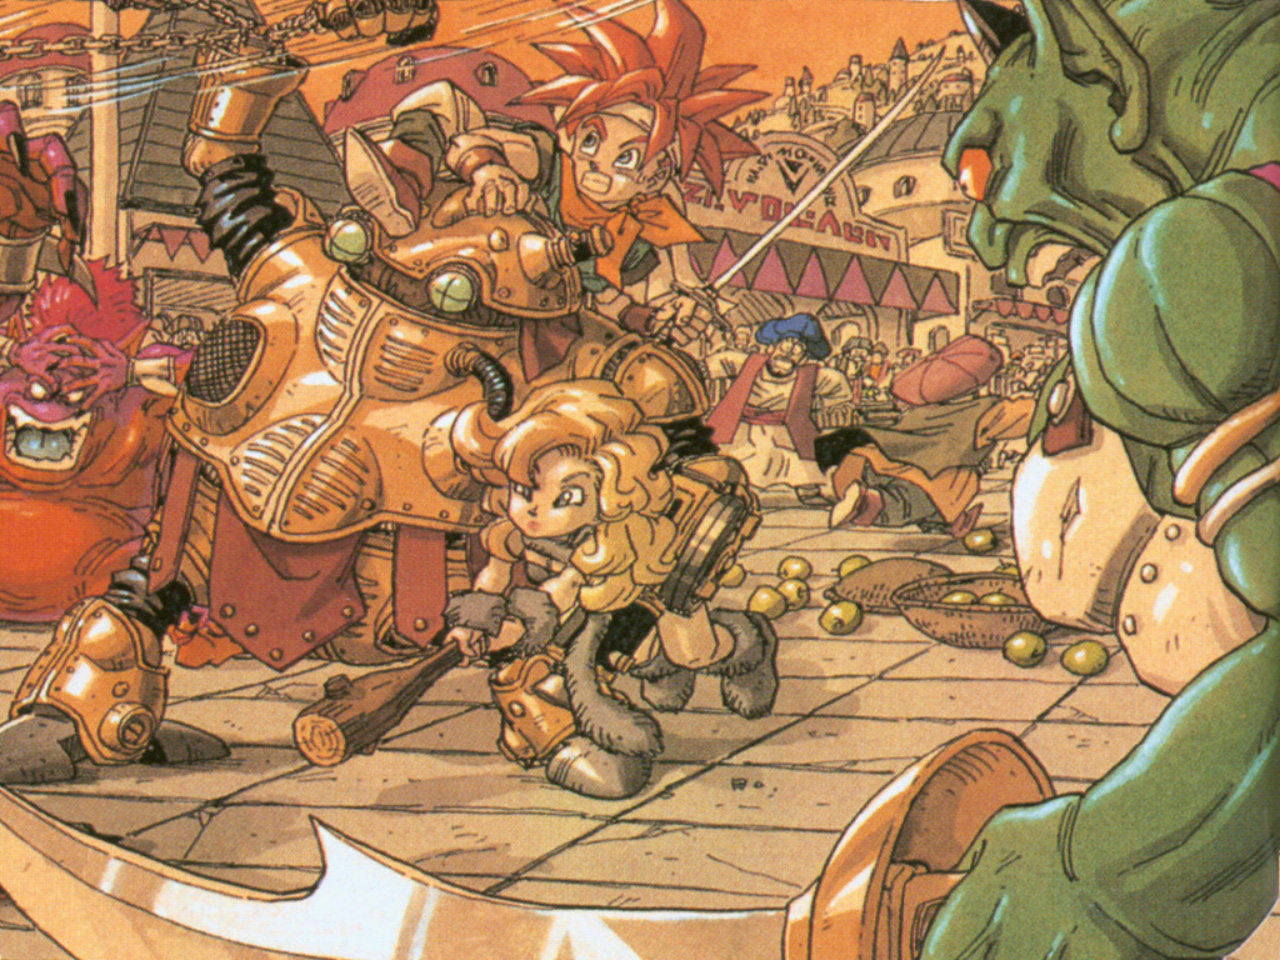 82 Chrono Trigger HD Wallpapers | Backgrounds - Wallpaper Abyss